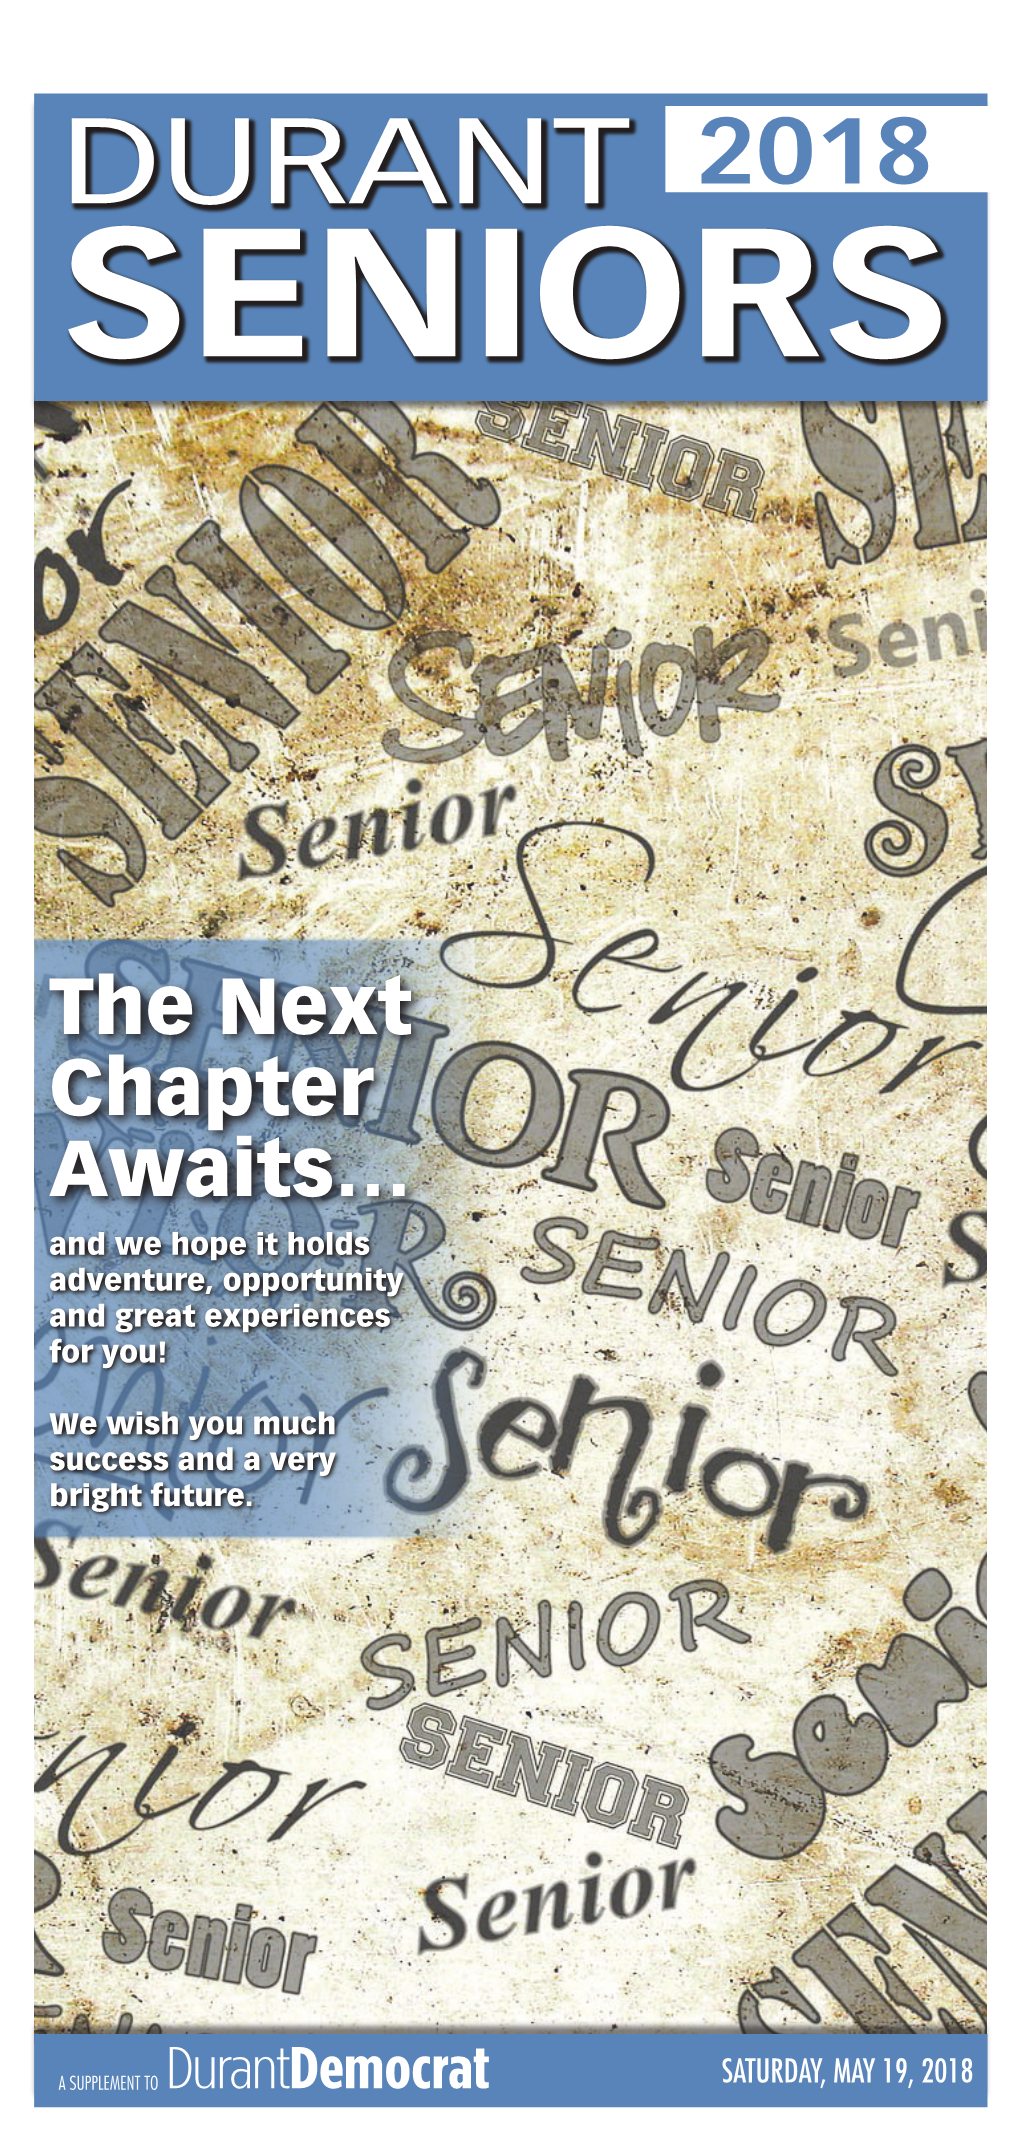 The Next Chapter Awaits… and We Hope It Holds Adventure, Opportunity and Great Experiences for You!